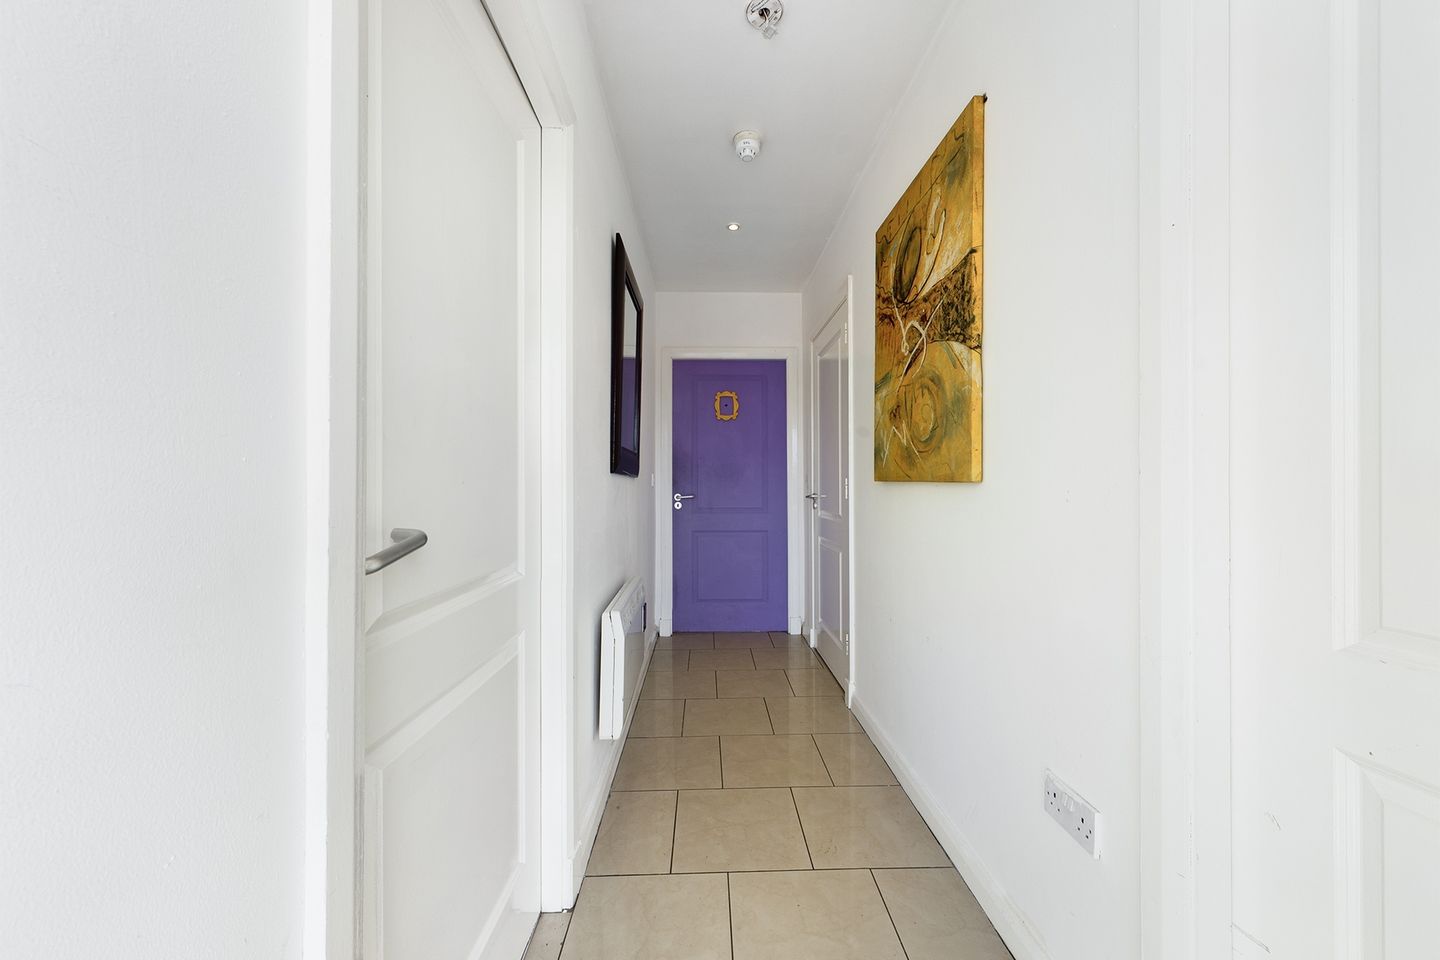 Apartment 35, Patricks Square, Waterford City, Co. Waterford